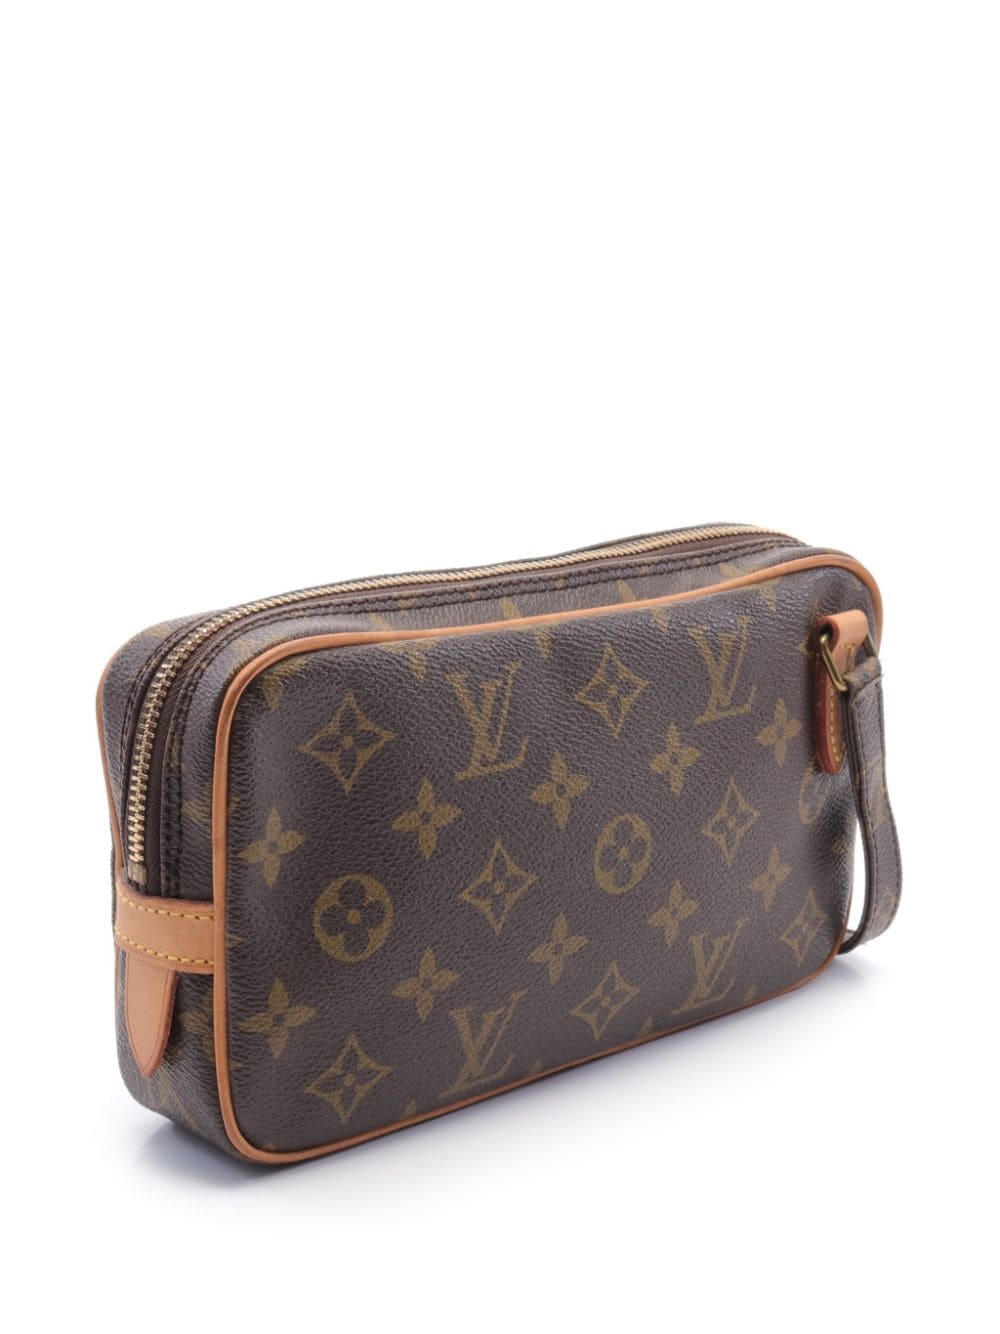 Pre-owned Louis Vuitton Marly Bandouliere 斜挎包（1988年典藏款） In Brown